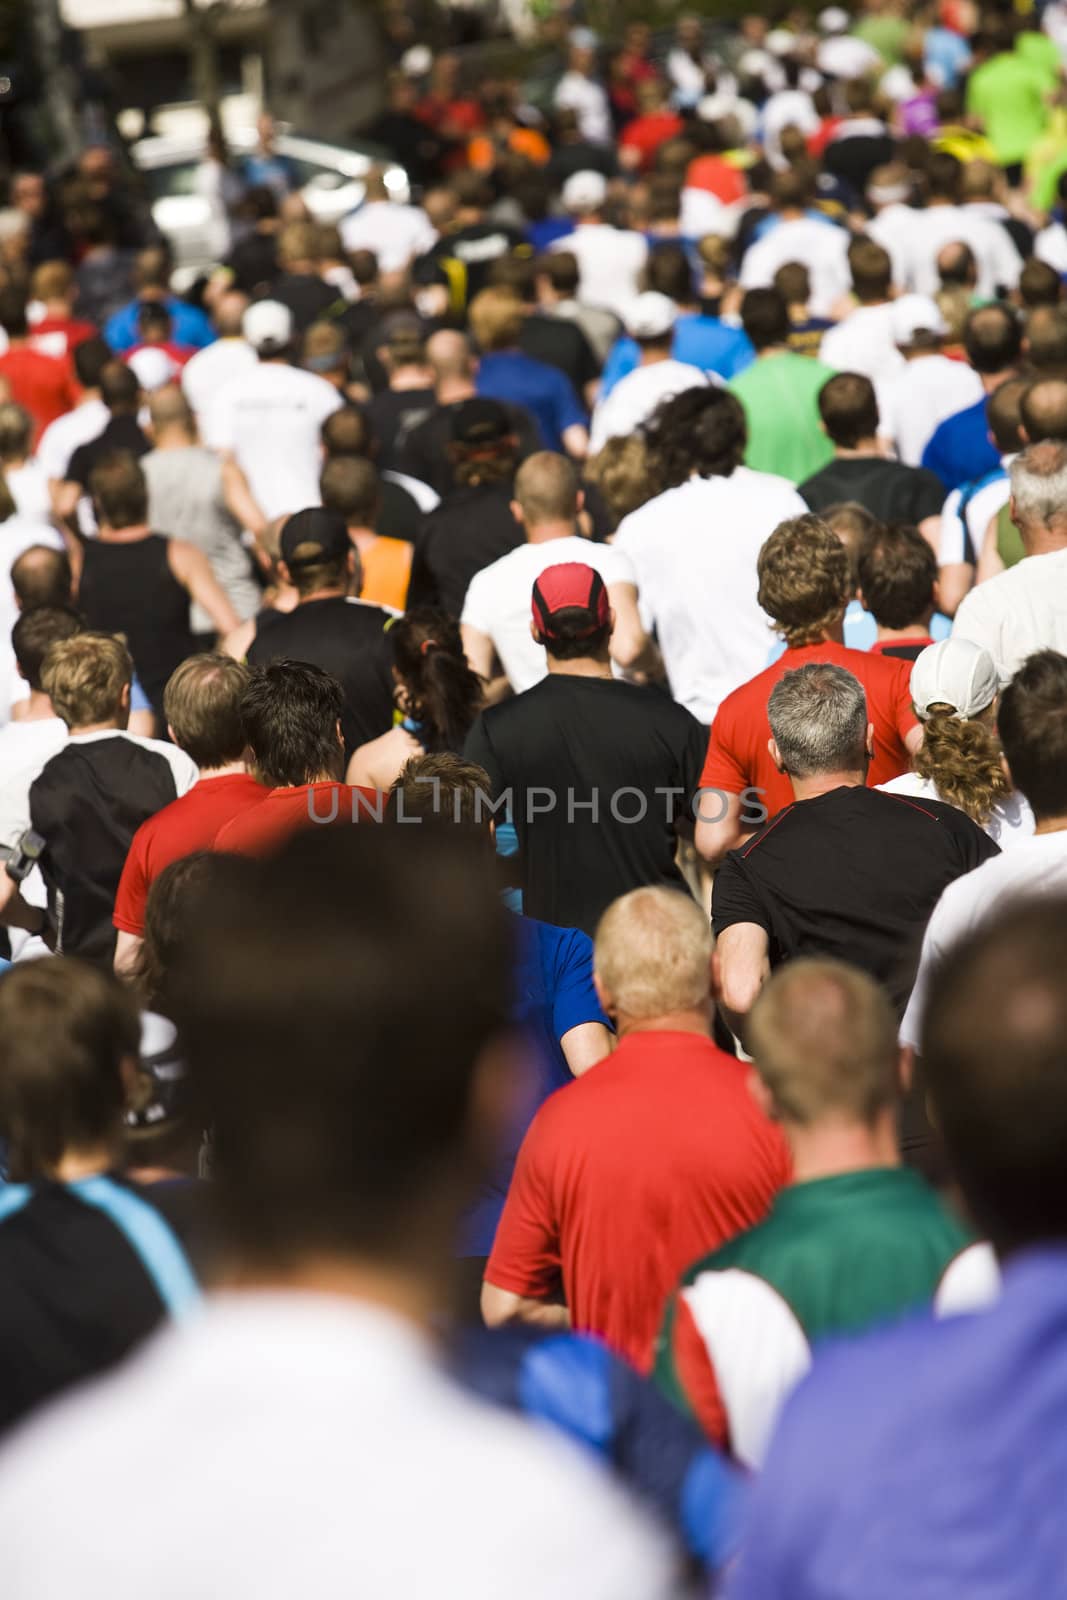 Lots of people in a running competition